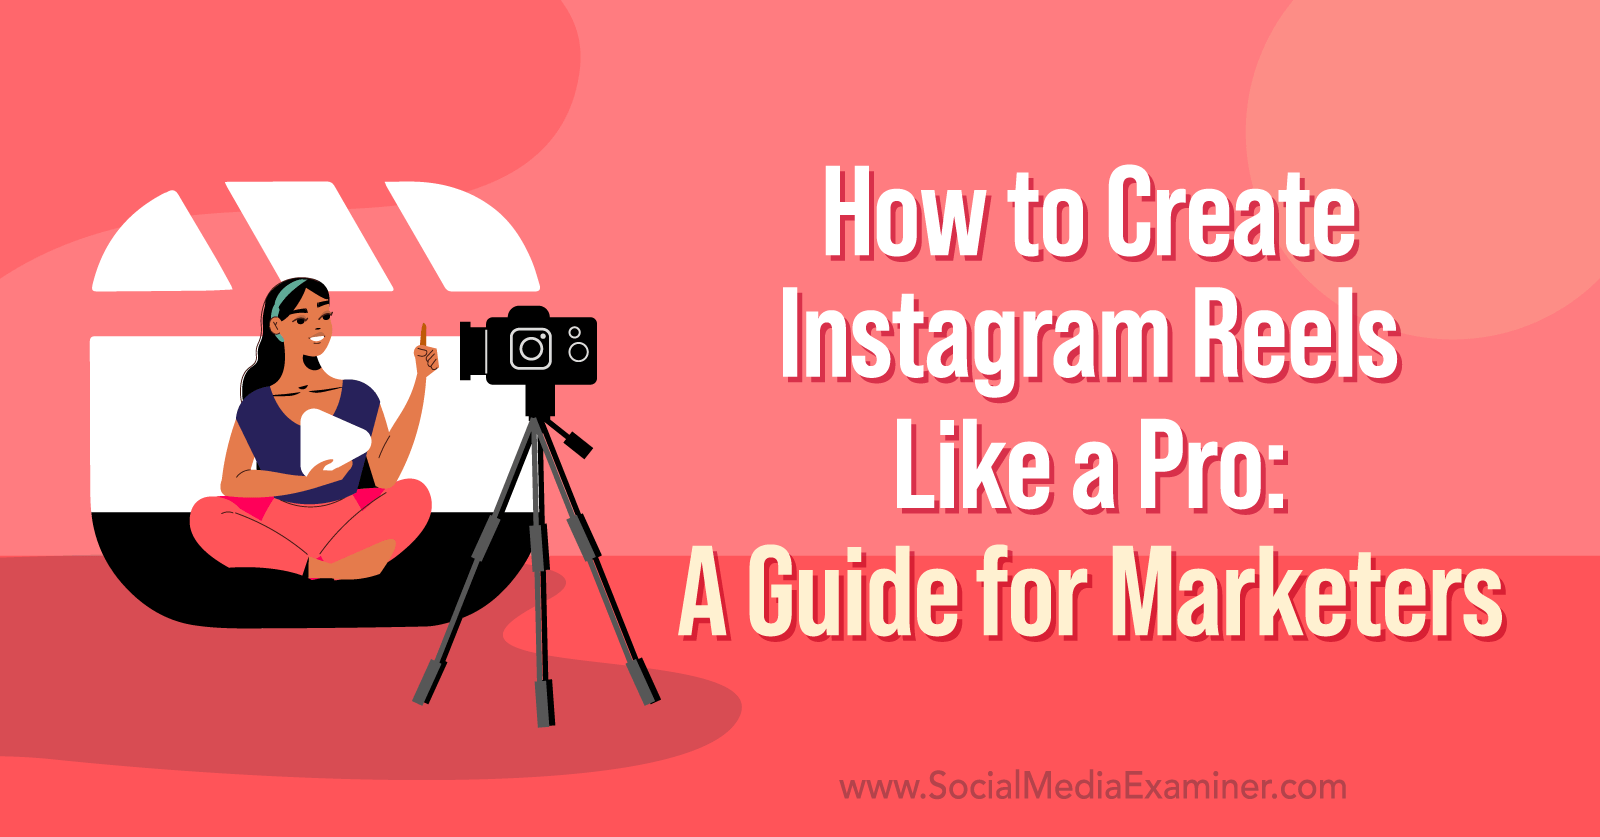 How to Create Instagram Reels Like a Pro: A Guide for Marketers by Corinna Keefe